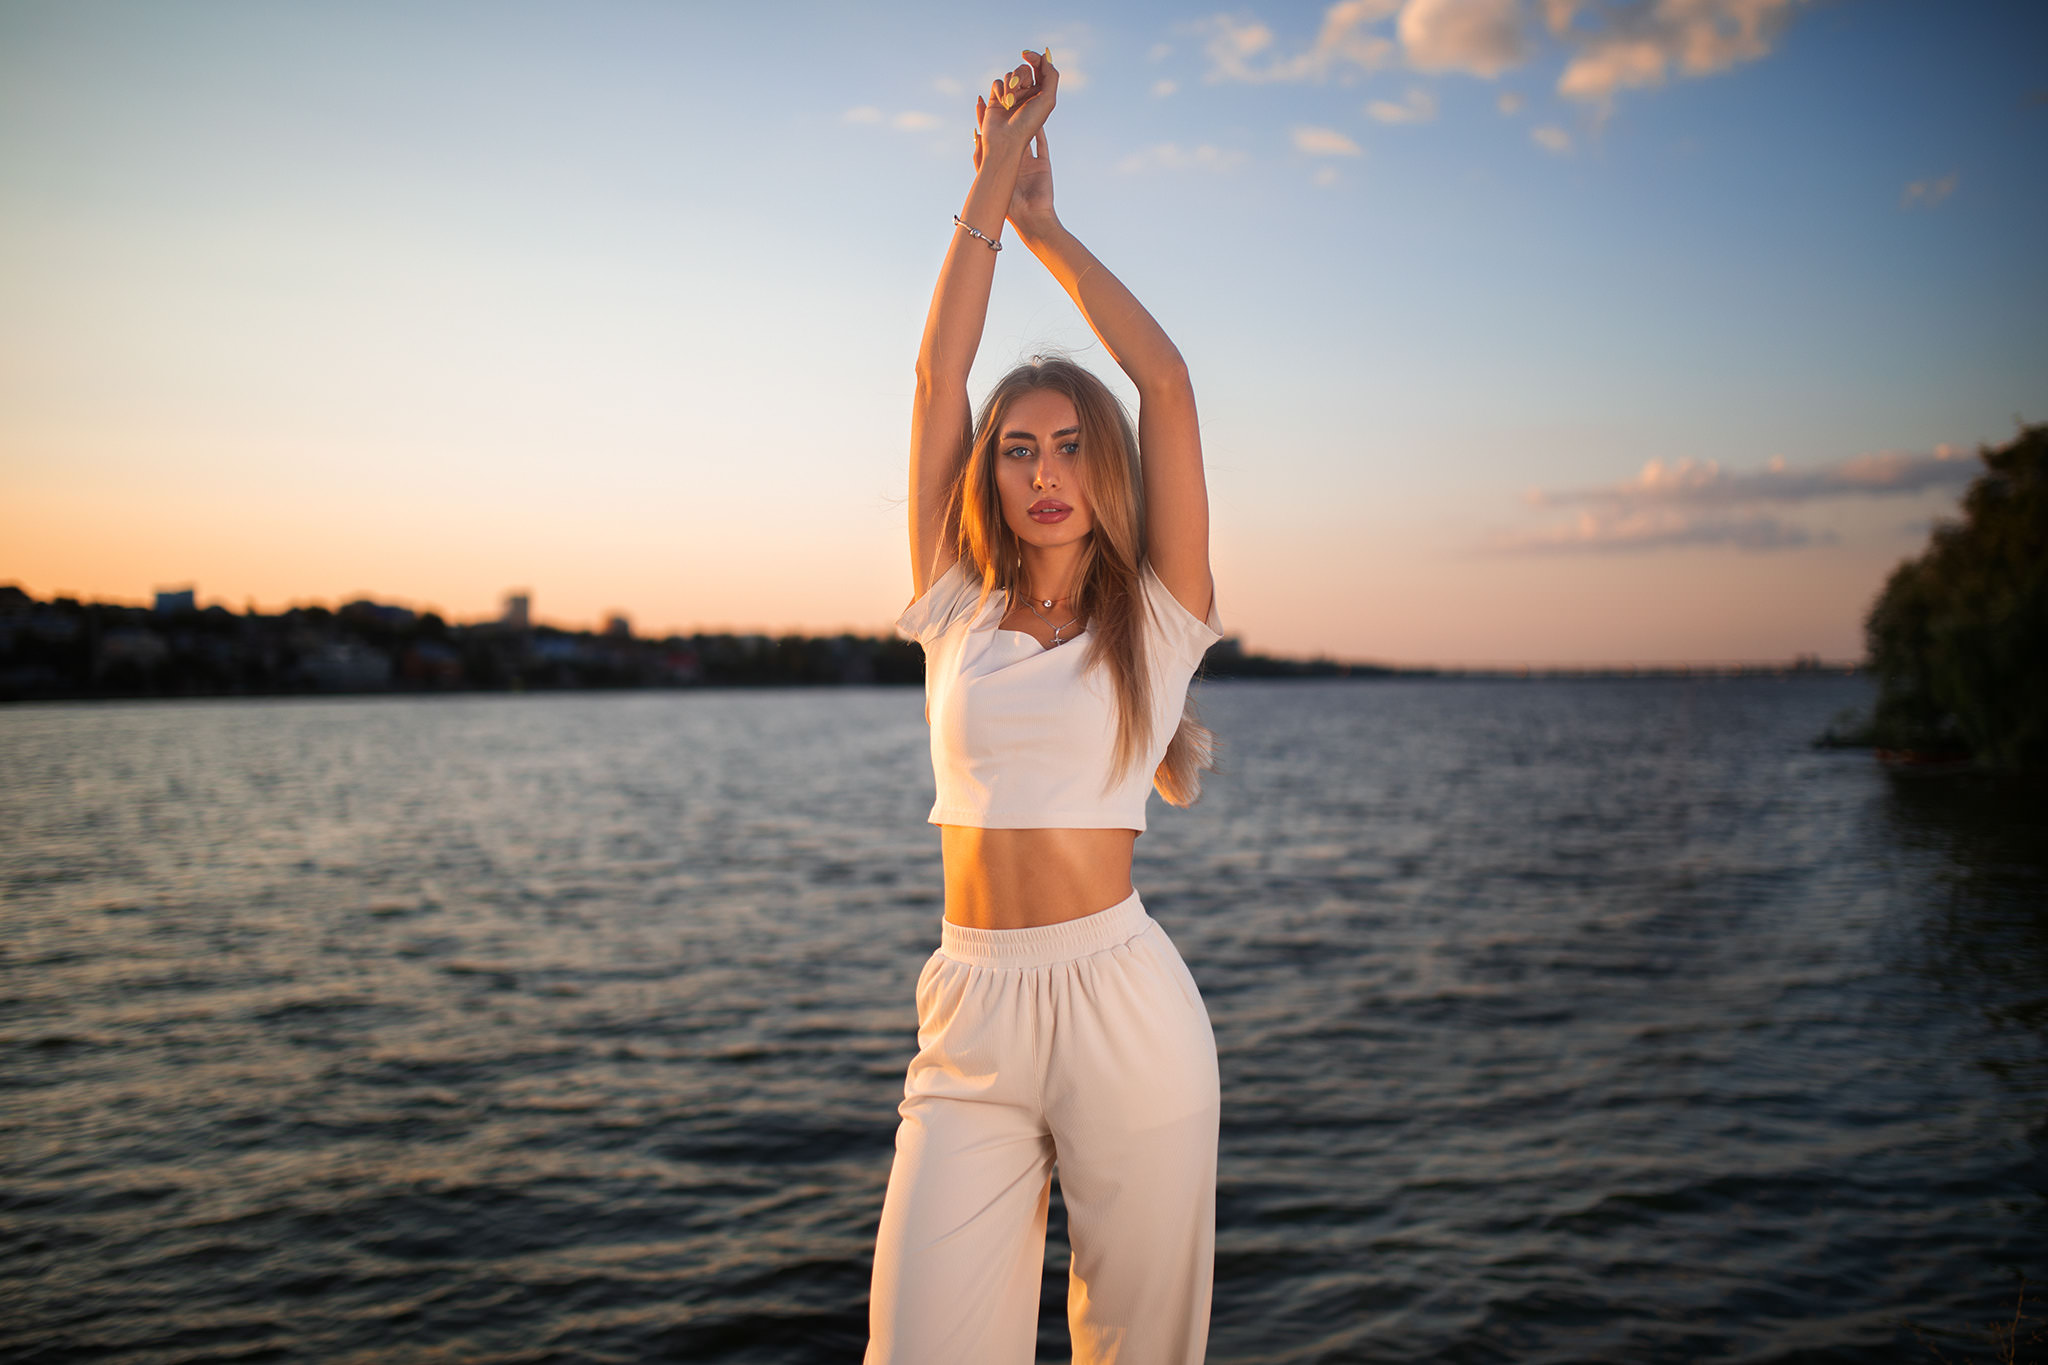 Women Blonde Dmitry Sn Arms Up River Sunset Women Outdoors White Clothing Crucifix Necklace Blue Eye 2048x1365